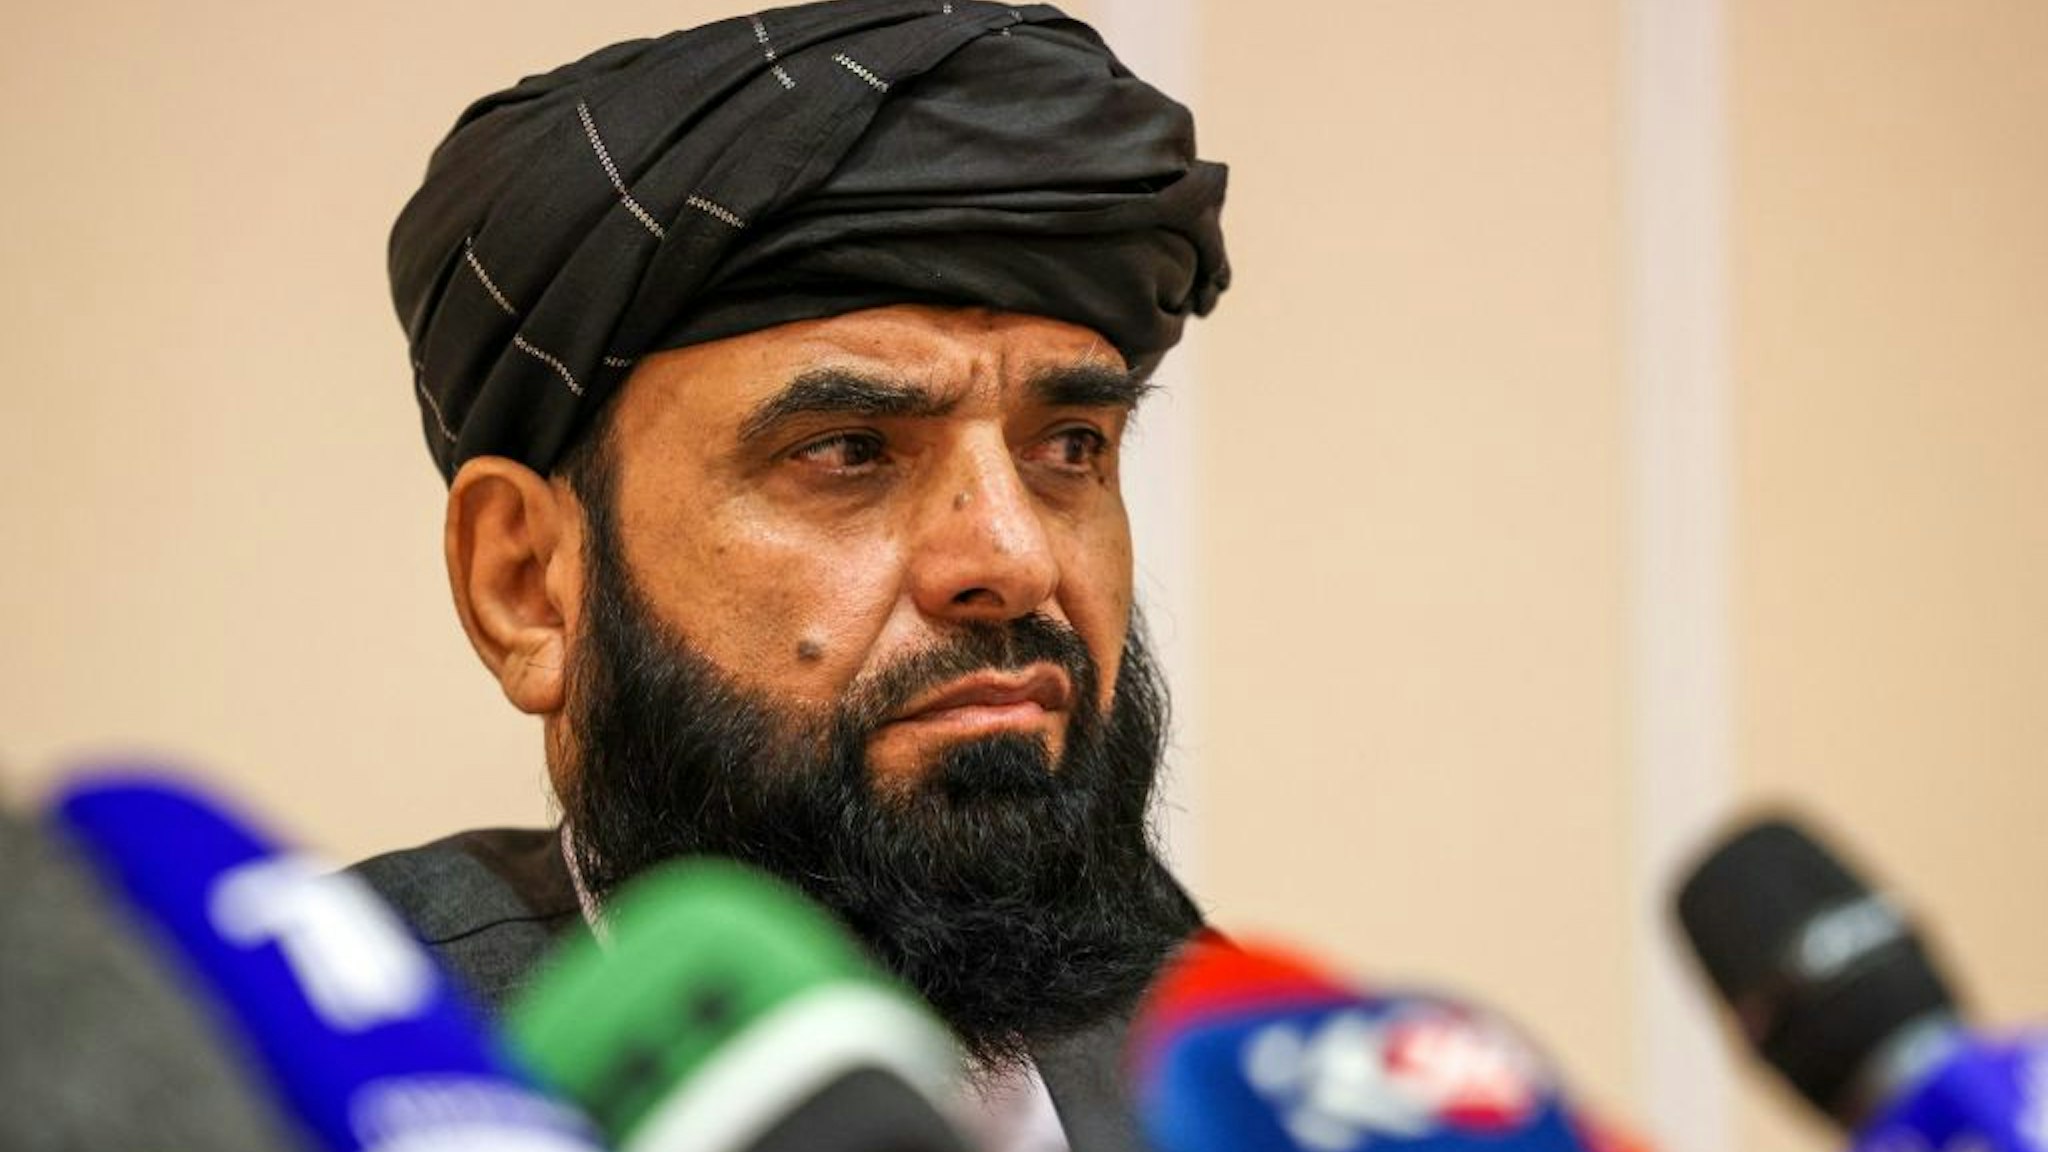 Taliban negotiator Suhail Shaheen attends a press conference in Moscow on July 9, 2021. - Russia on July 9, 2021 said the Taliban controls about two-thirds of the Afghan-Tajik border and urged all sides in Afghanistan to show restraint.